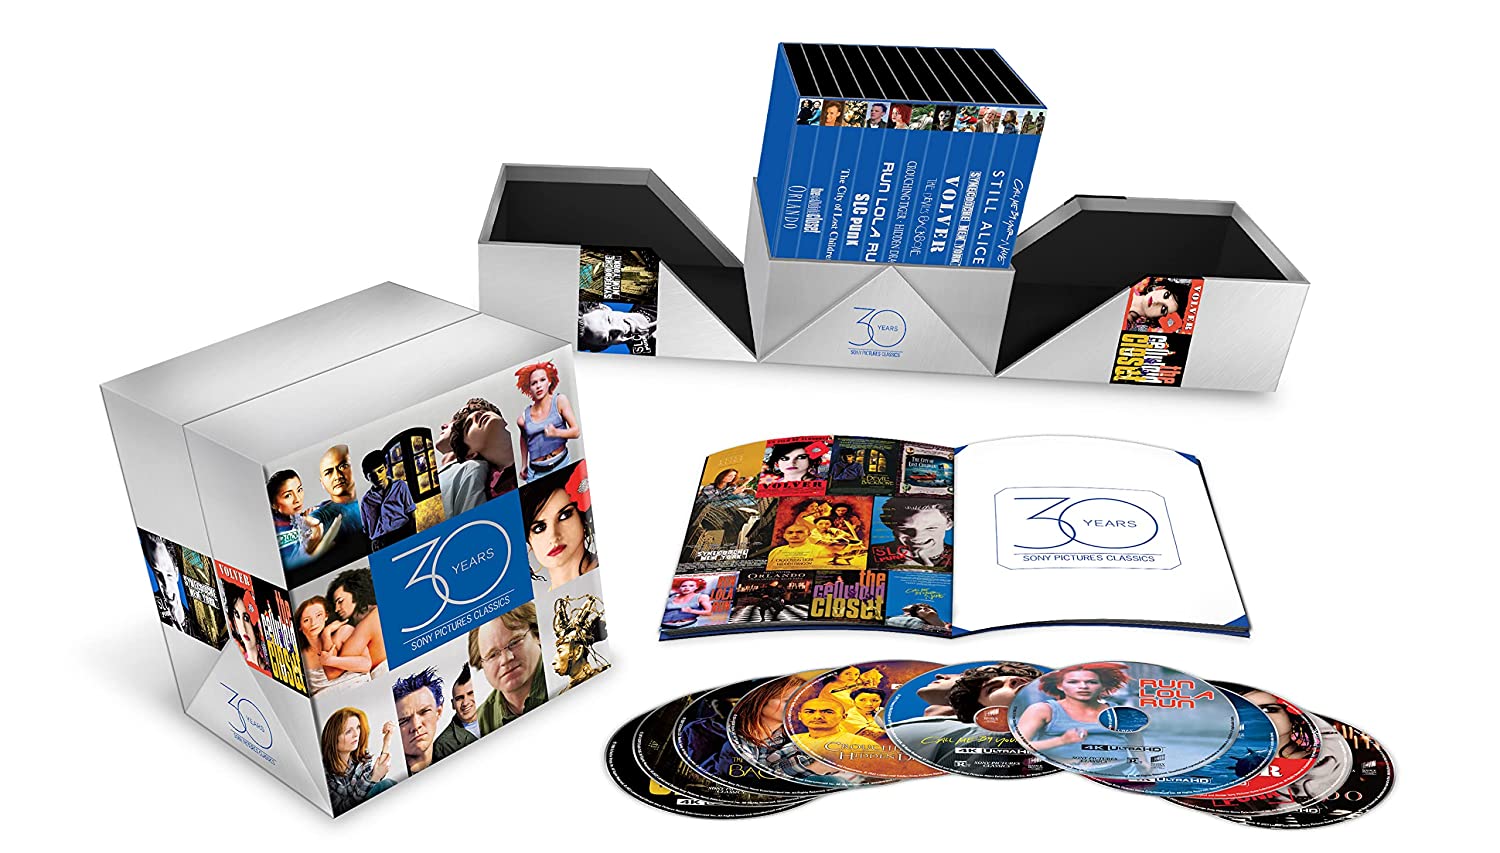 Sony Pictures Classics 30th Anniversary Collection Review